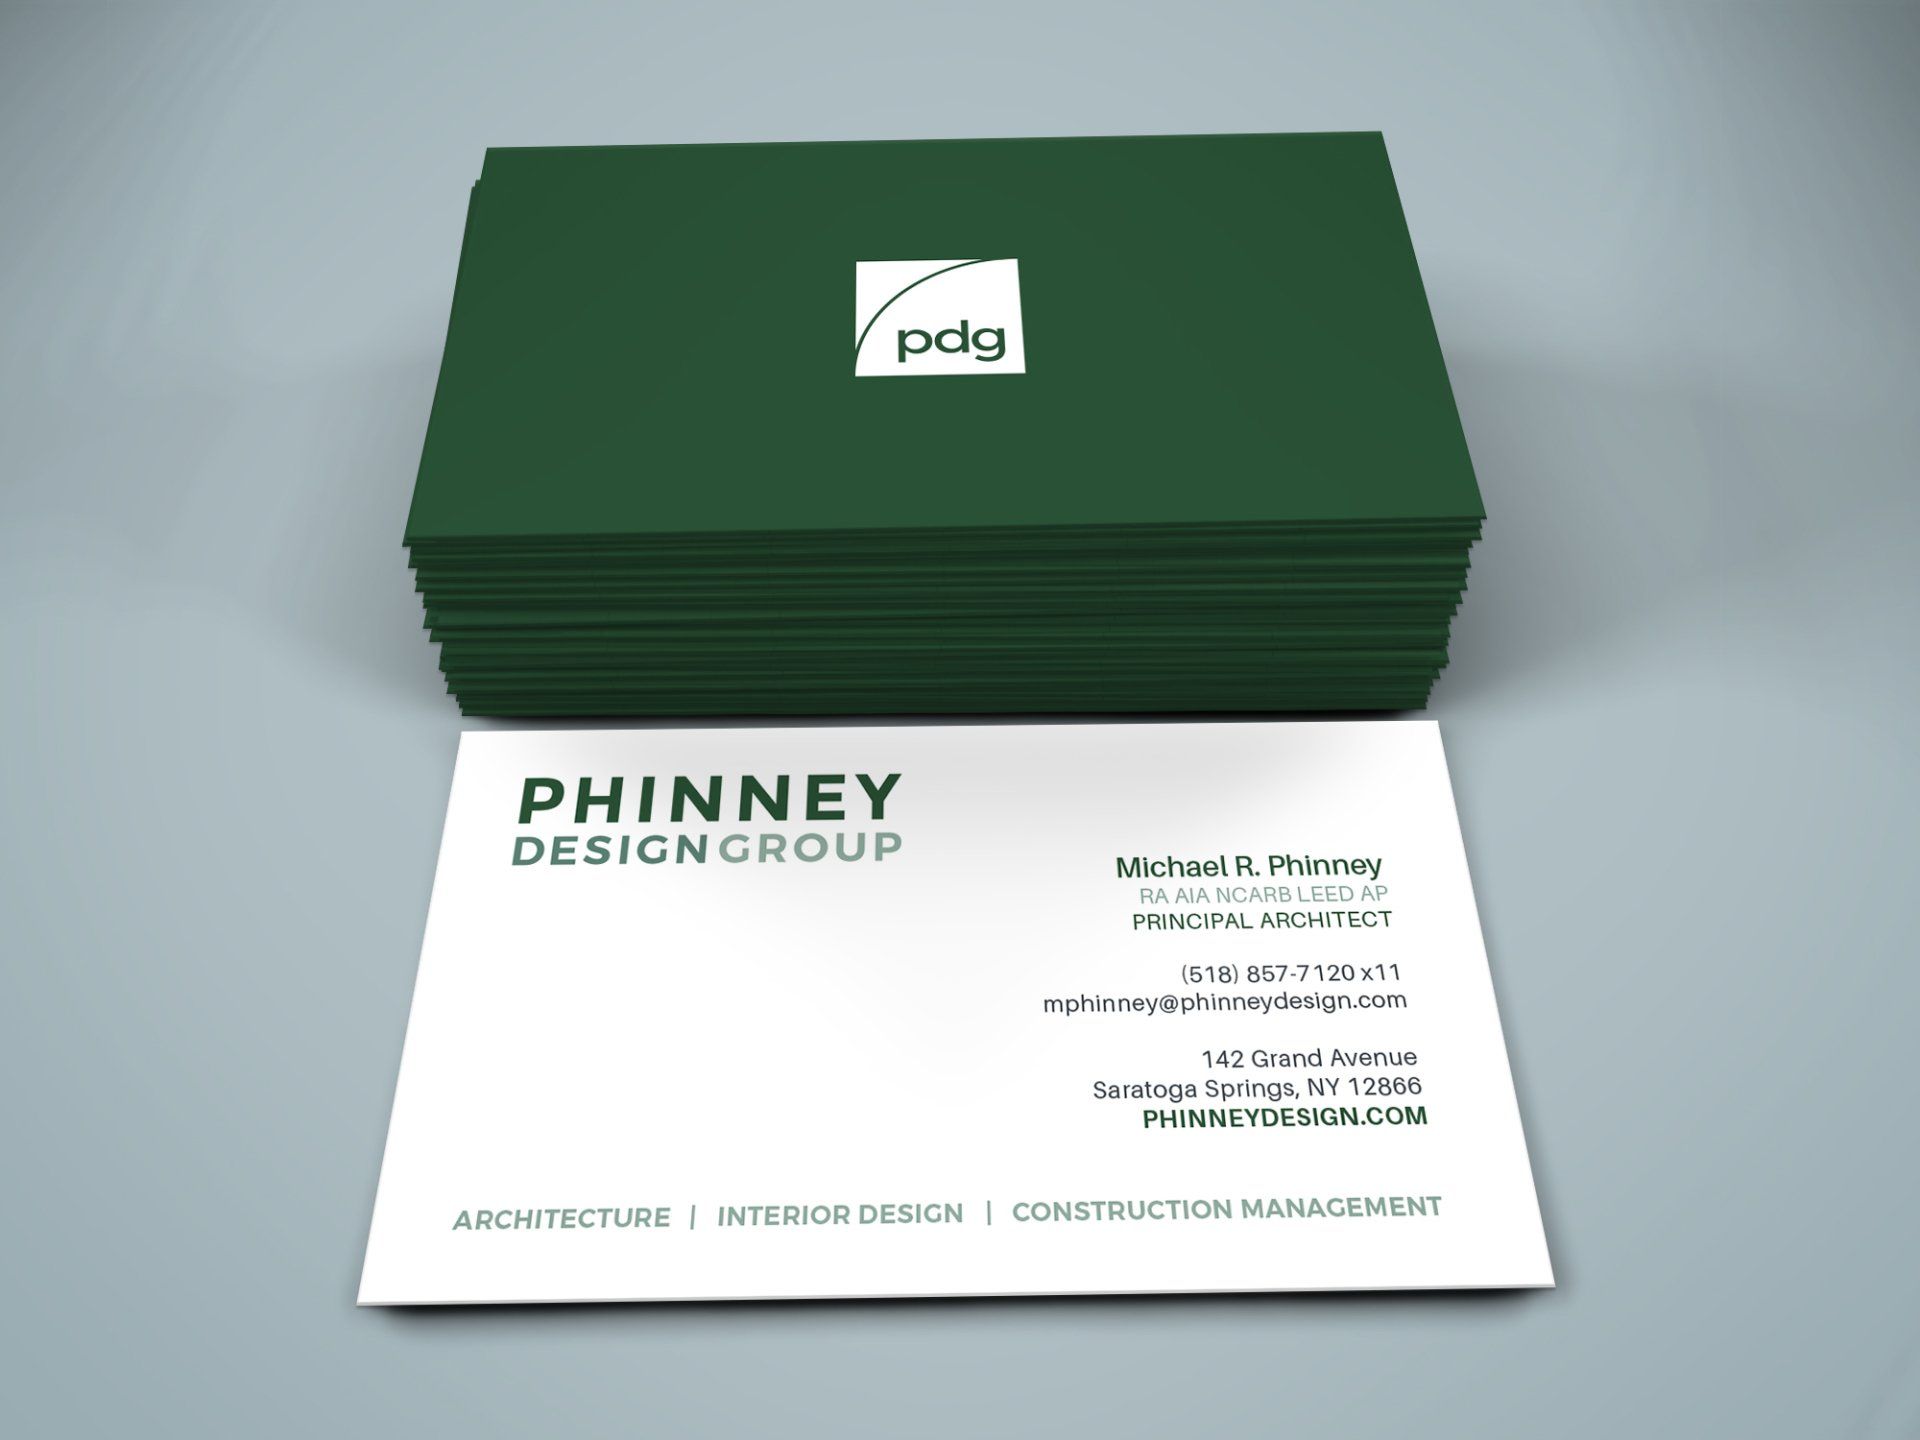 phinney-design-group-business-card-design